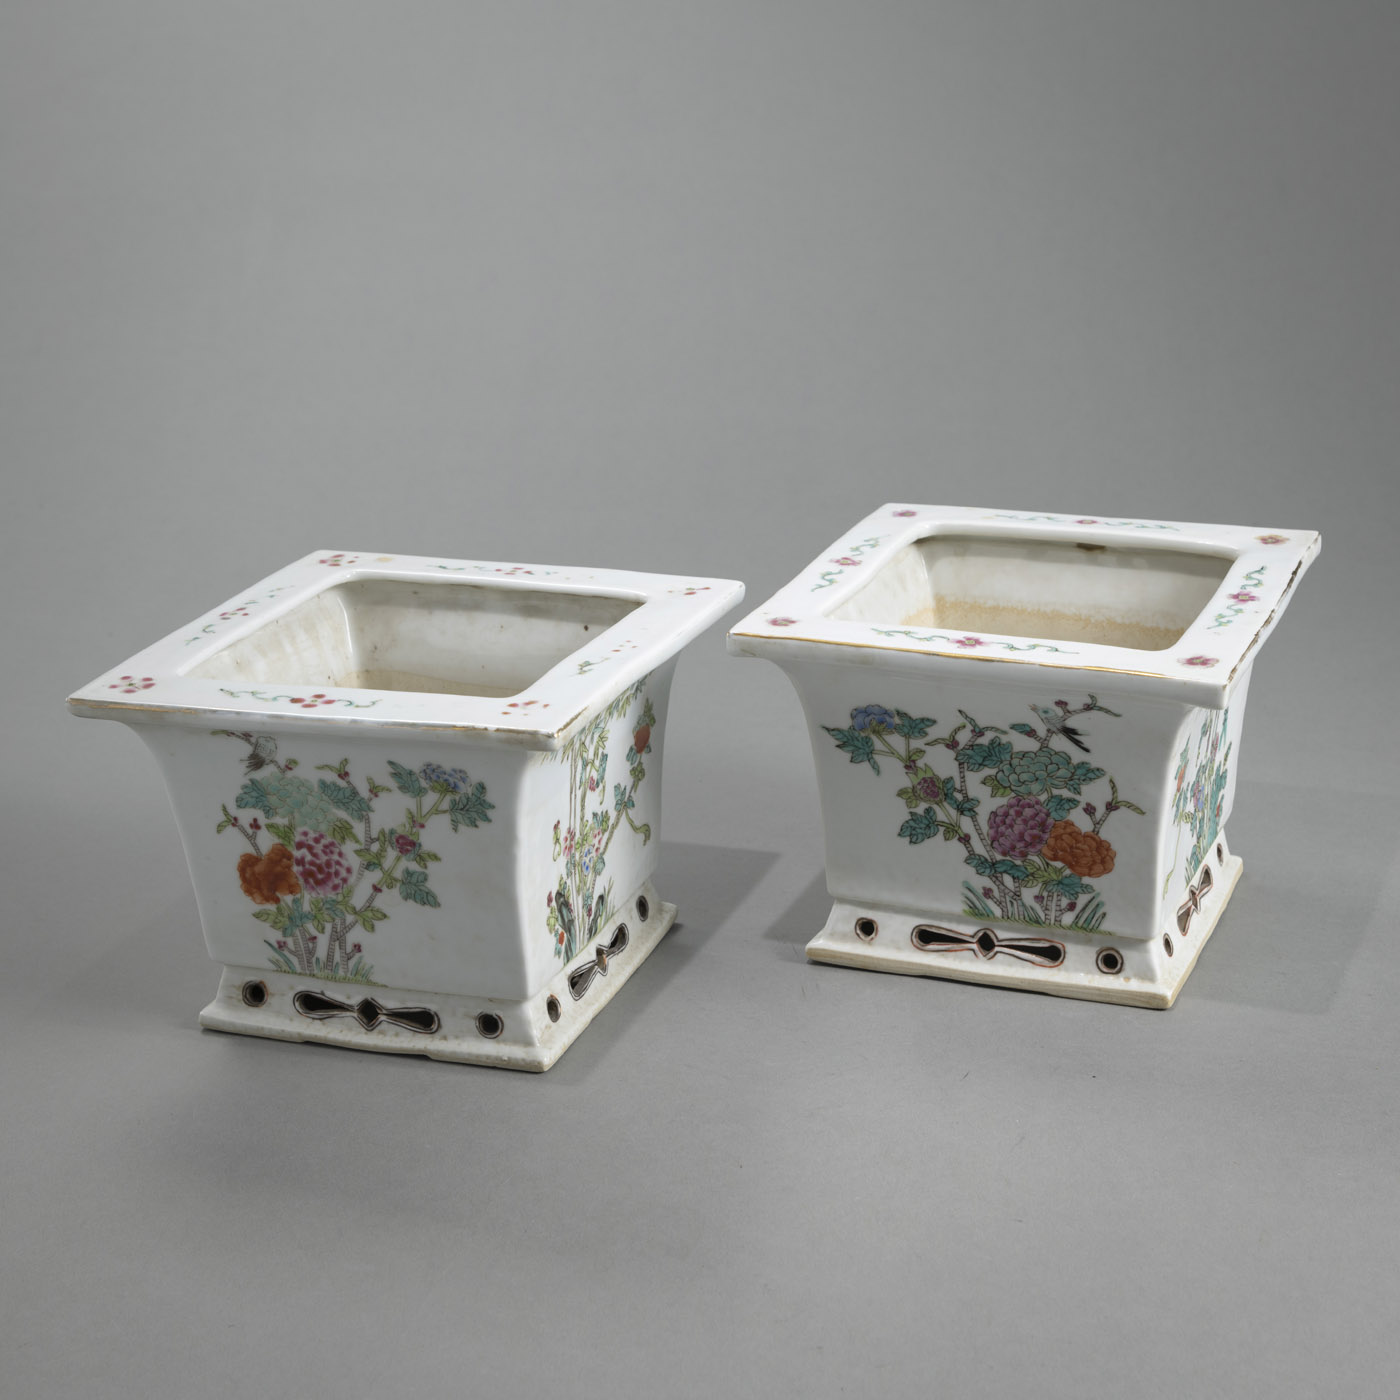 <b>A PAIR OF RECTANGULAR 'FAMILLE ROSE' PORCELAIN PLANTERS DECORATED WITH PEONY AND BAMBOO DECORATIONS</b>